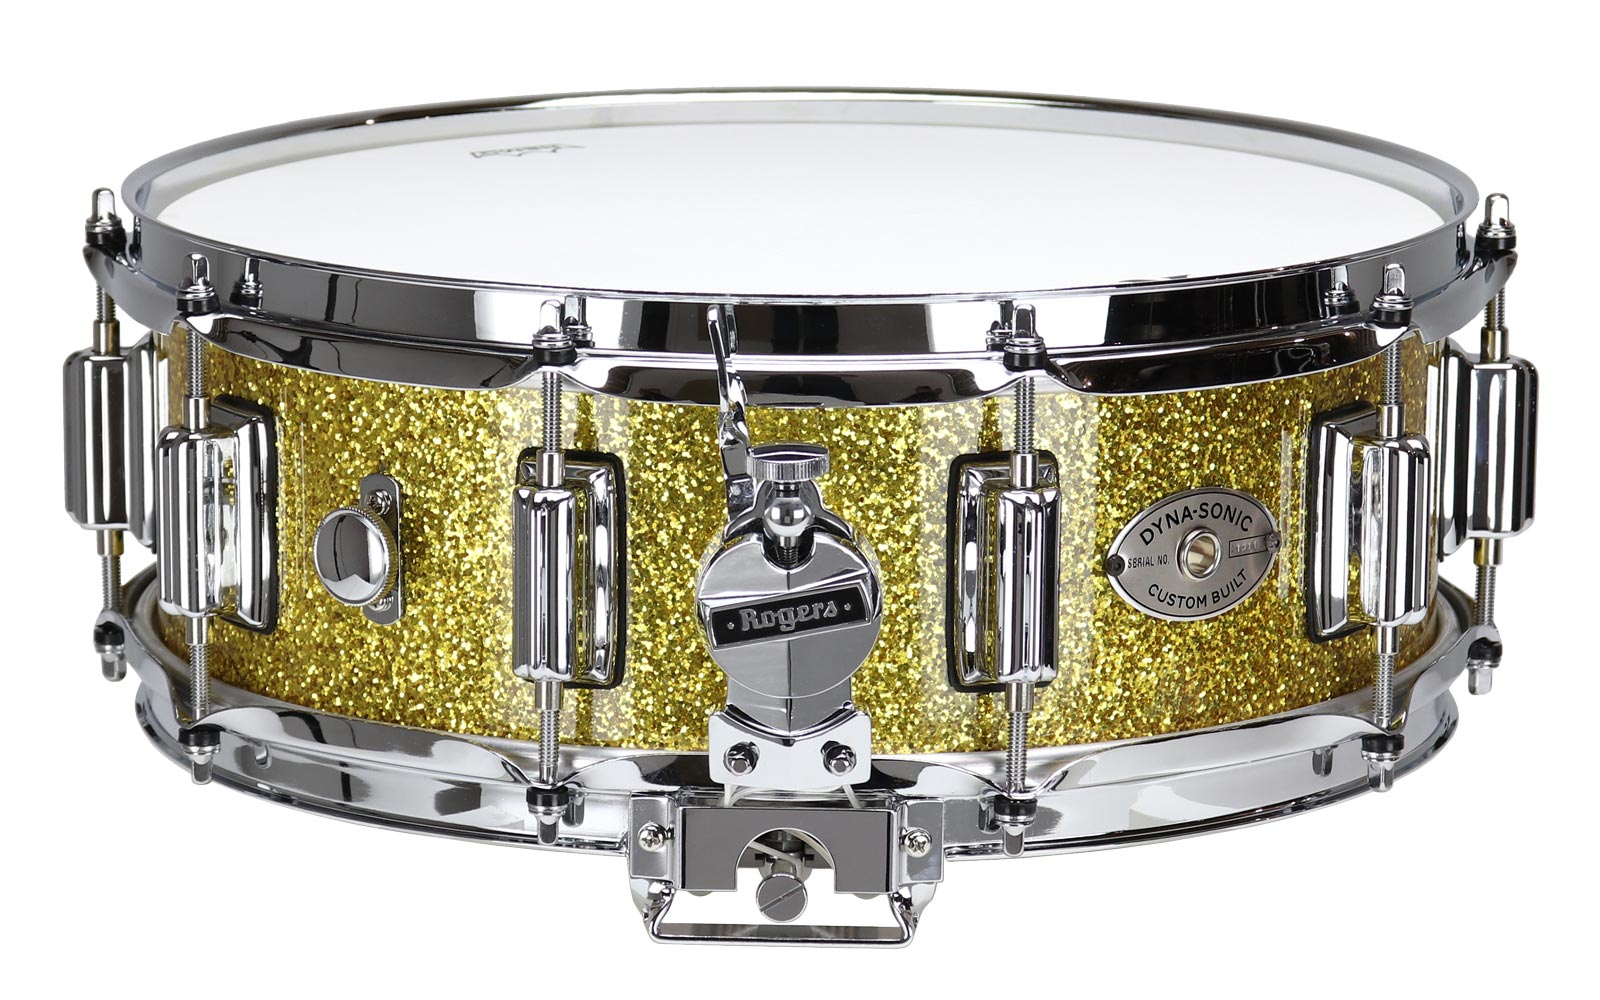 ROGERS DRUMS DYNA-SONIC 14